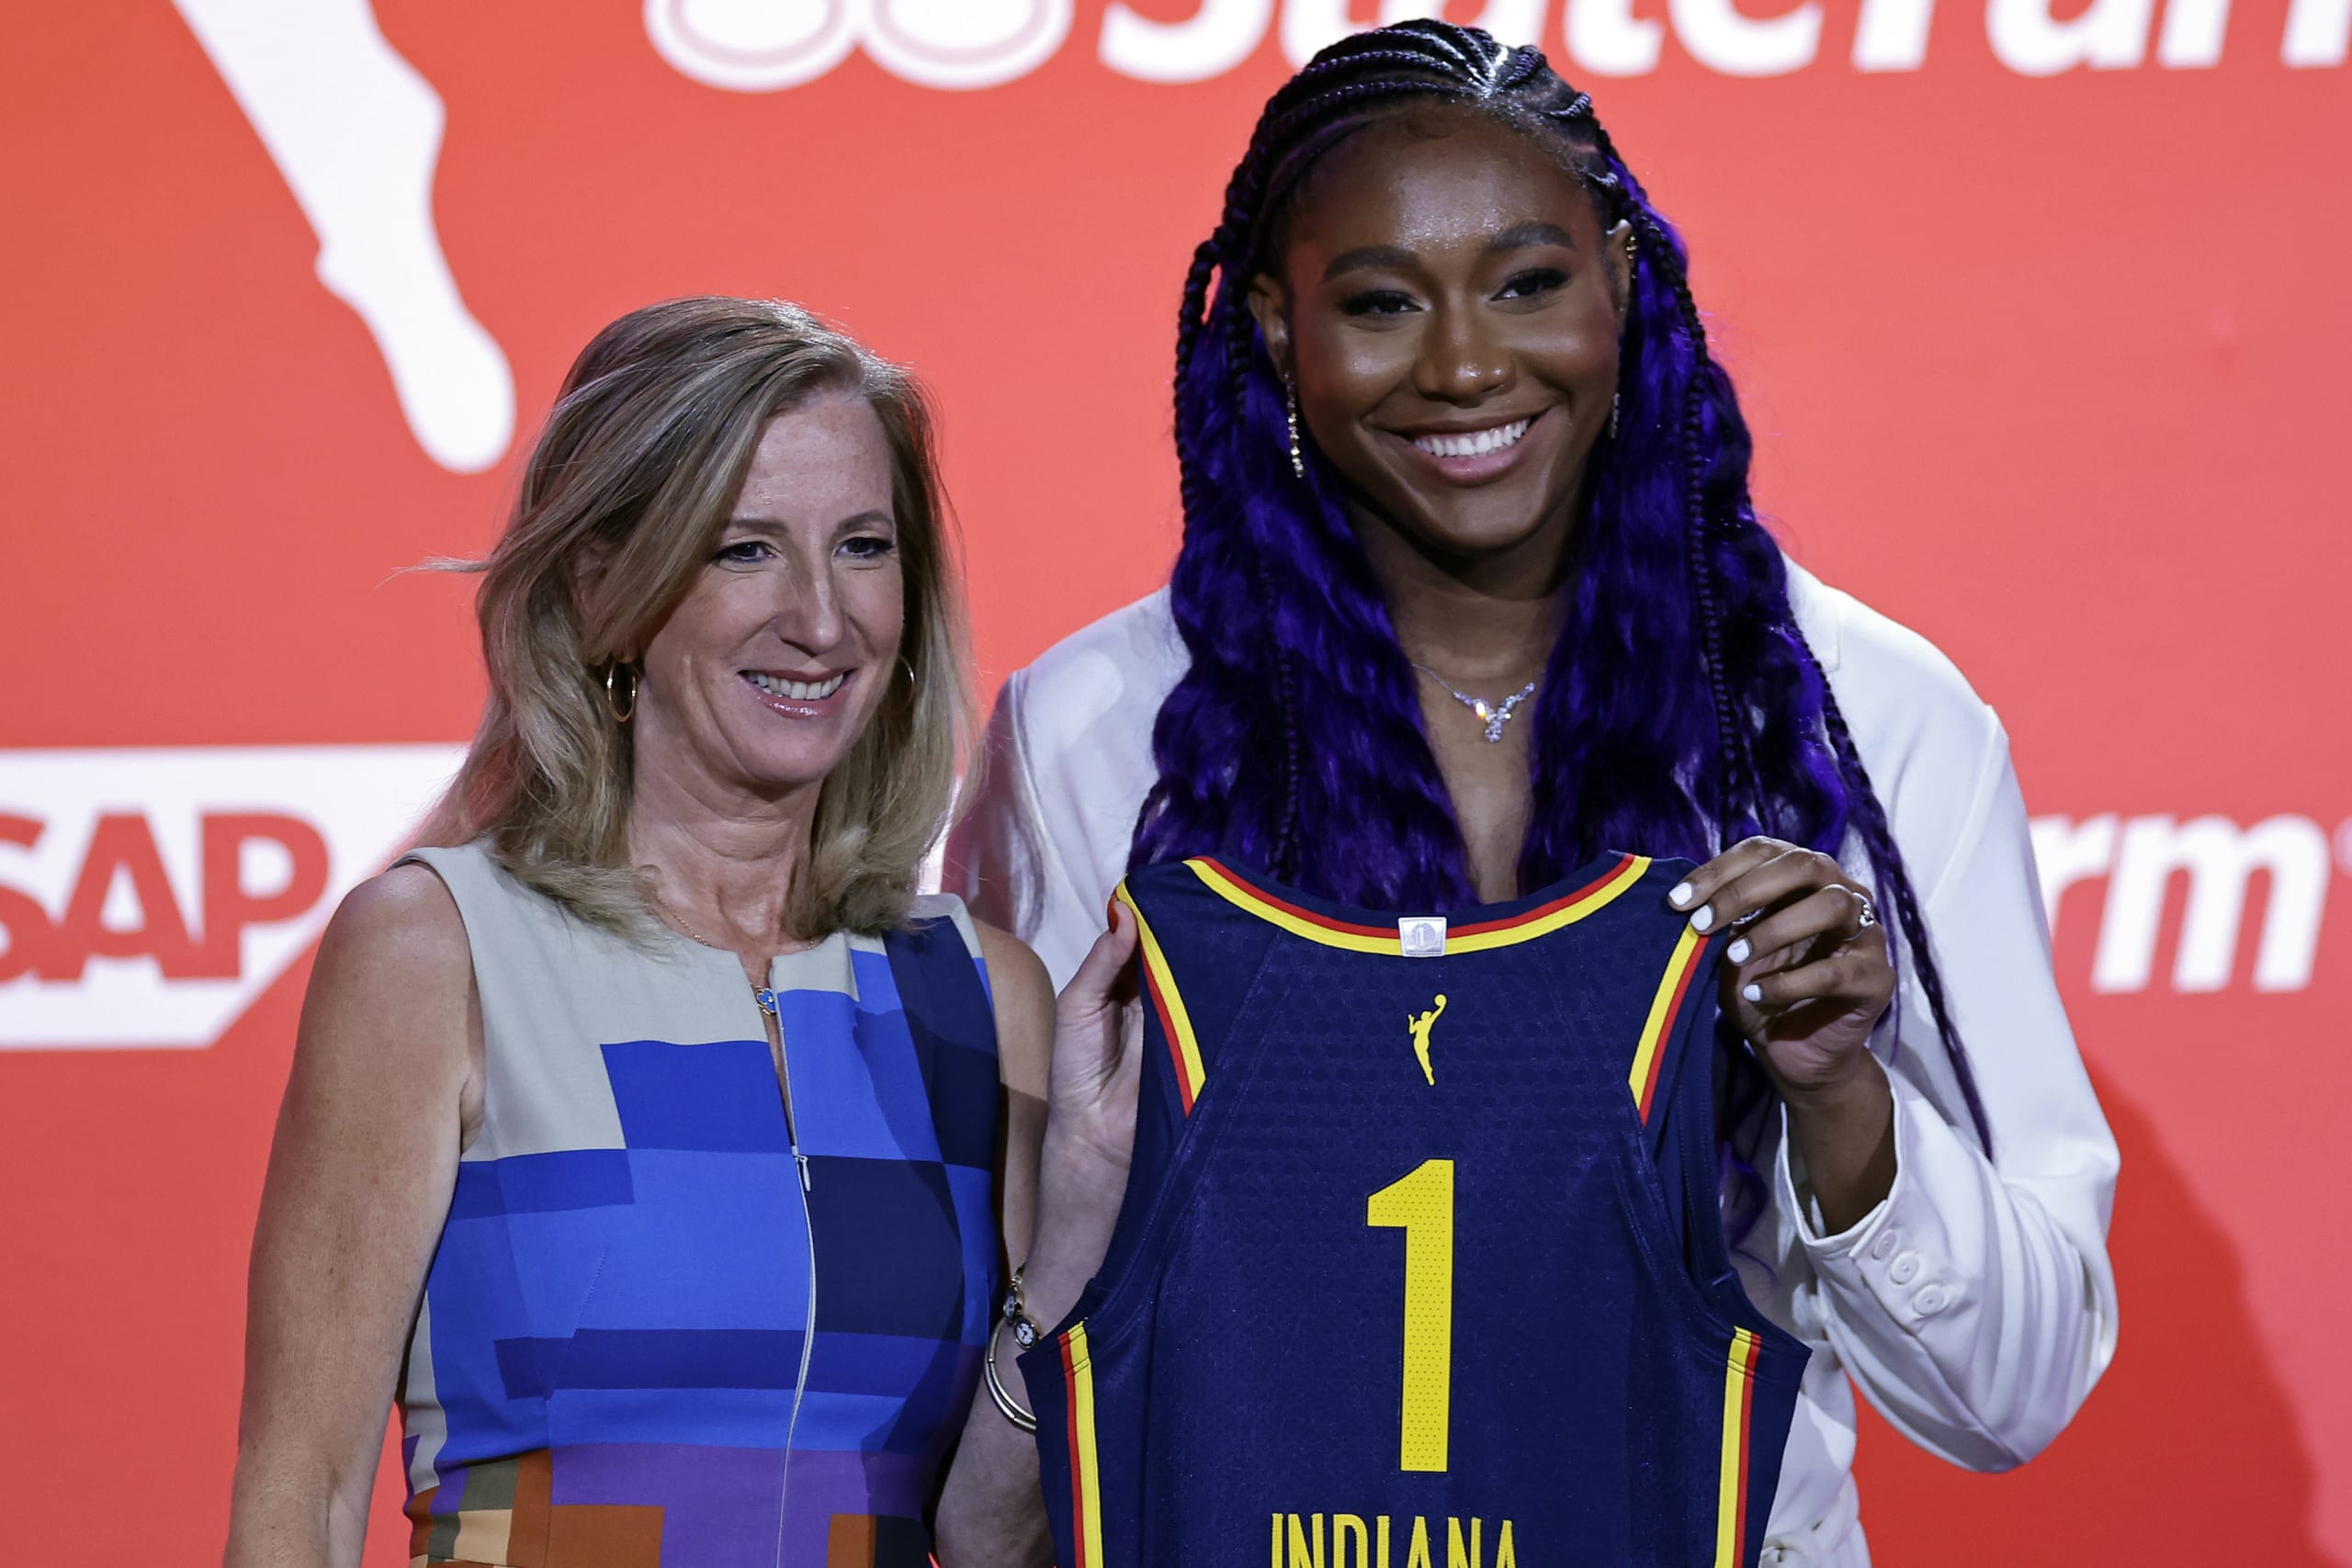 Aliyah Boston heads to Fever as No. 1 pick in WNBA draft